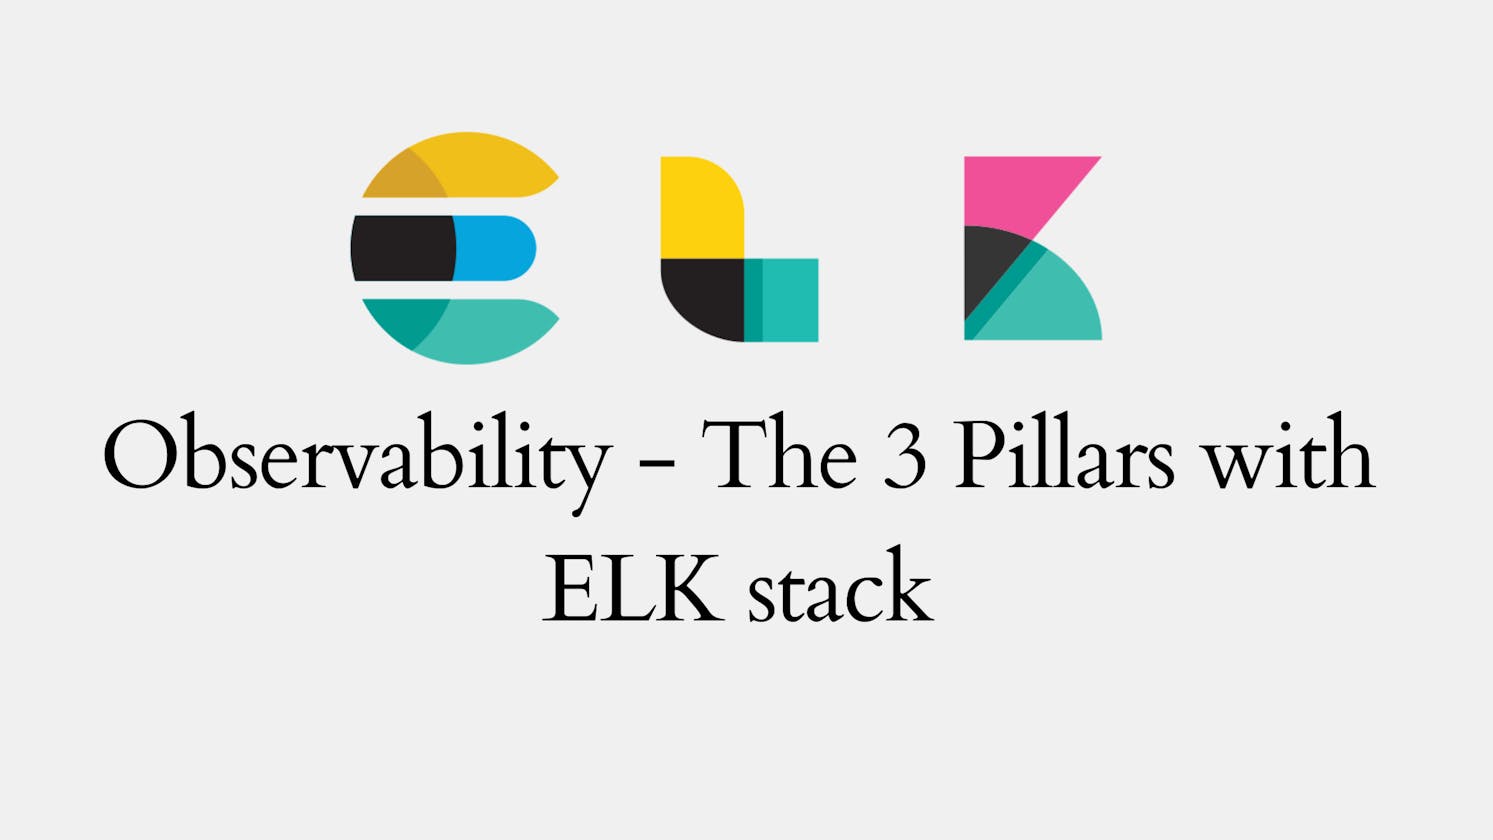 Observability - The 3 Pillars with ELK stack